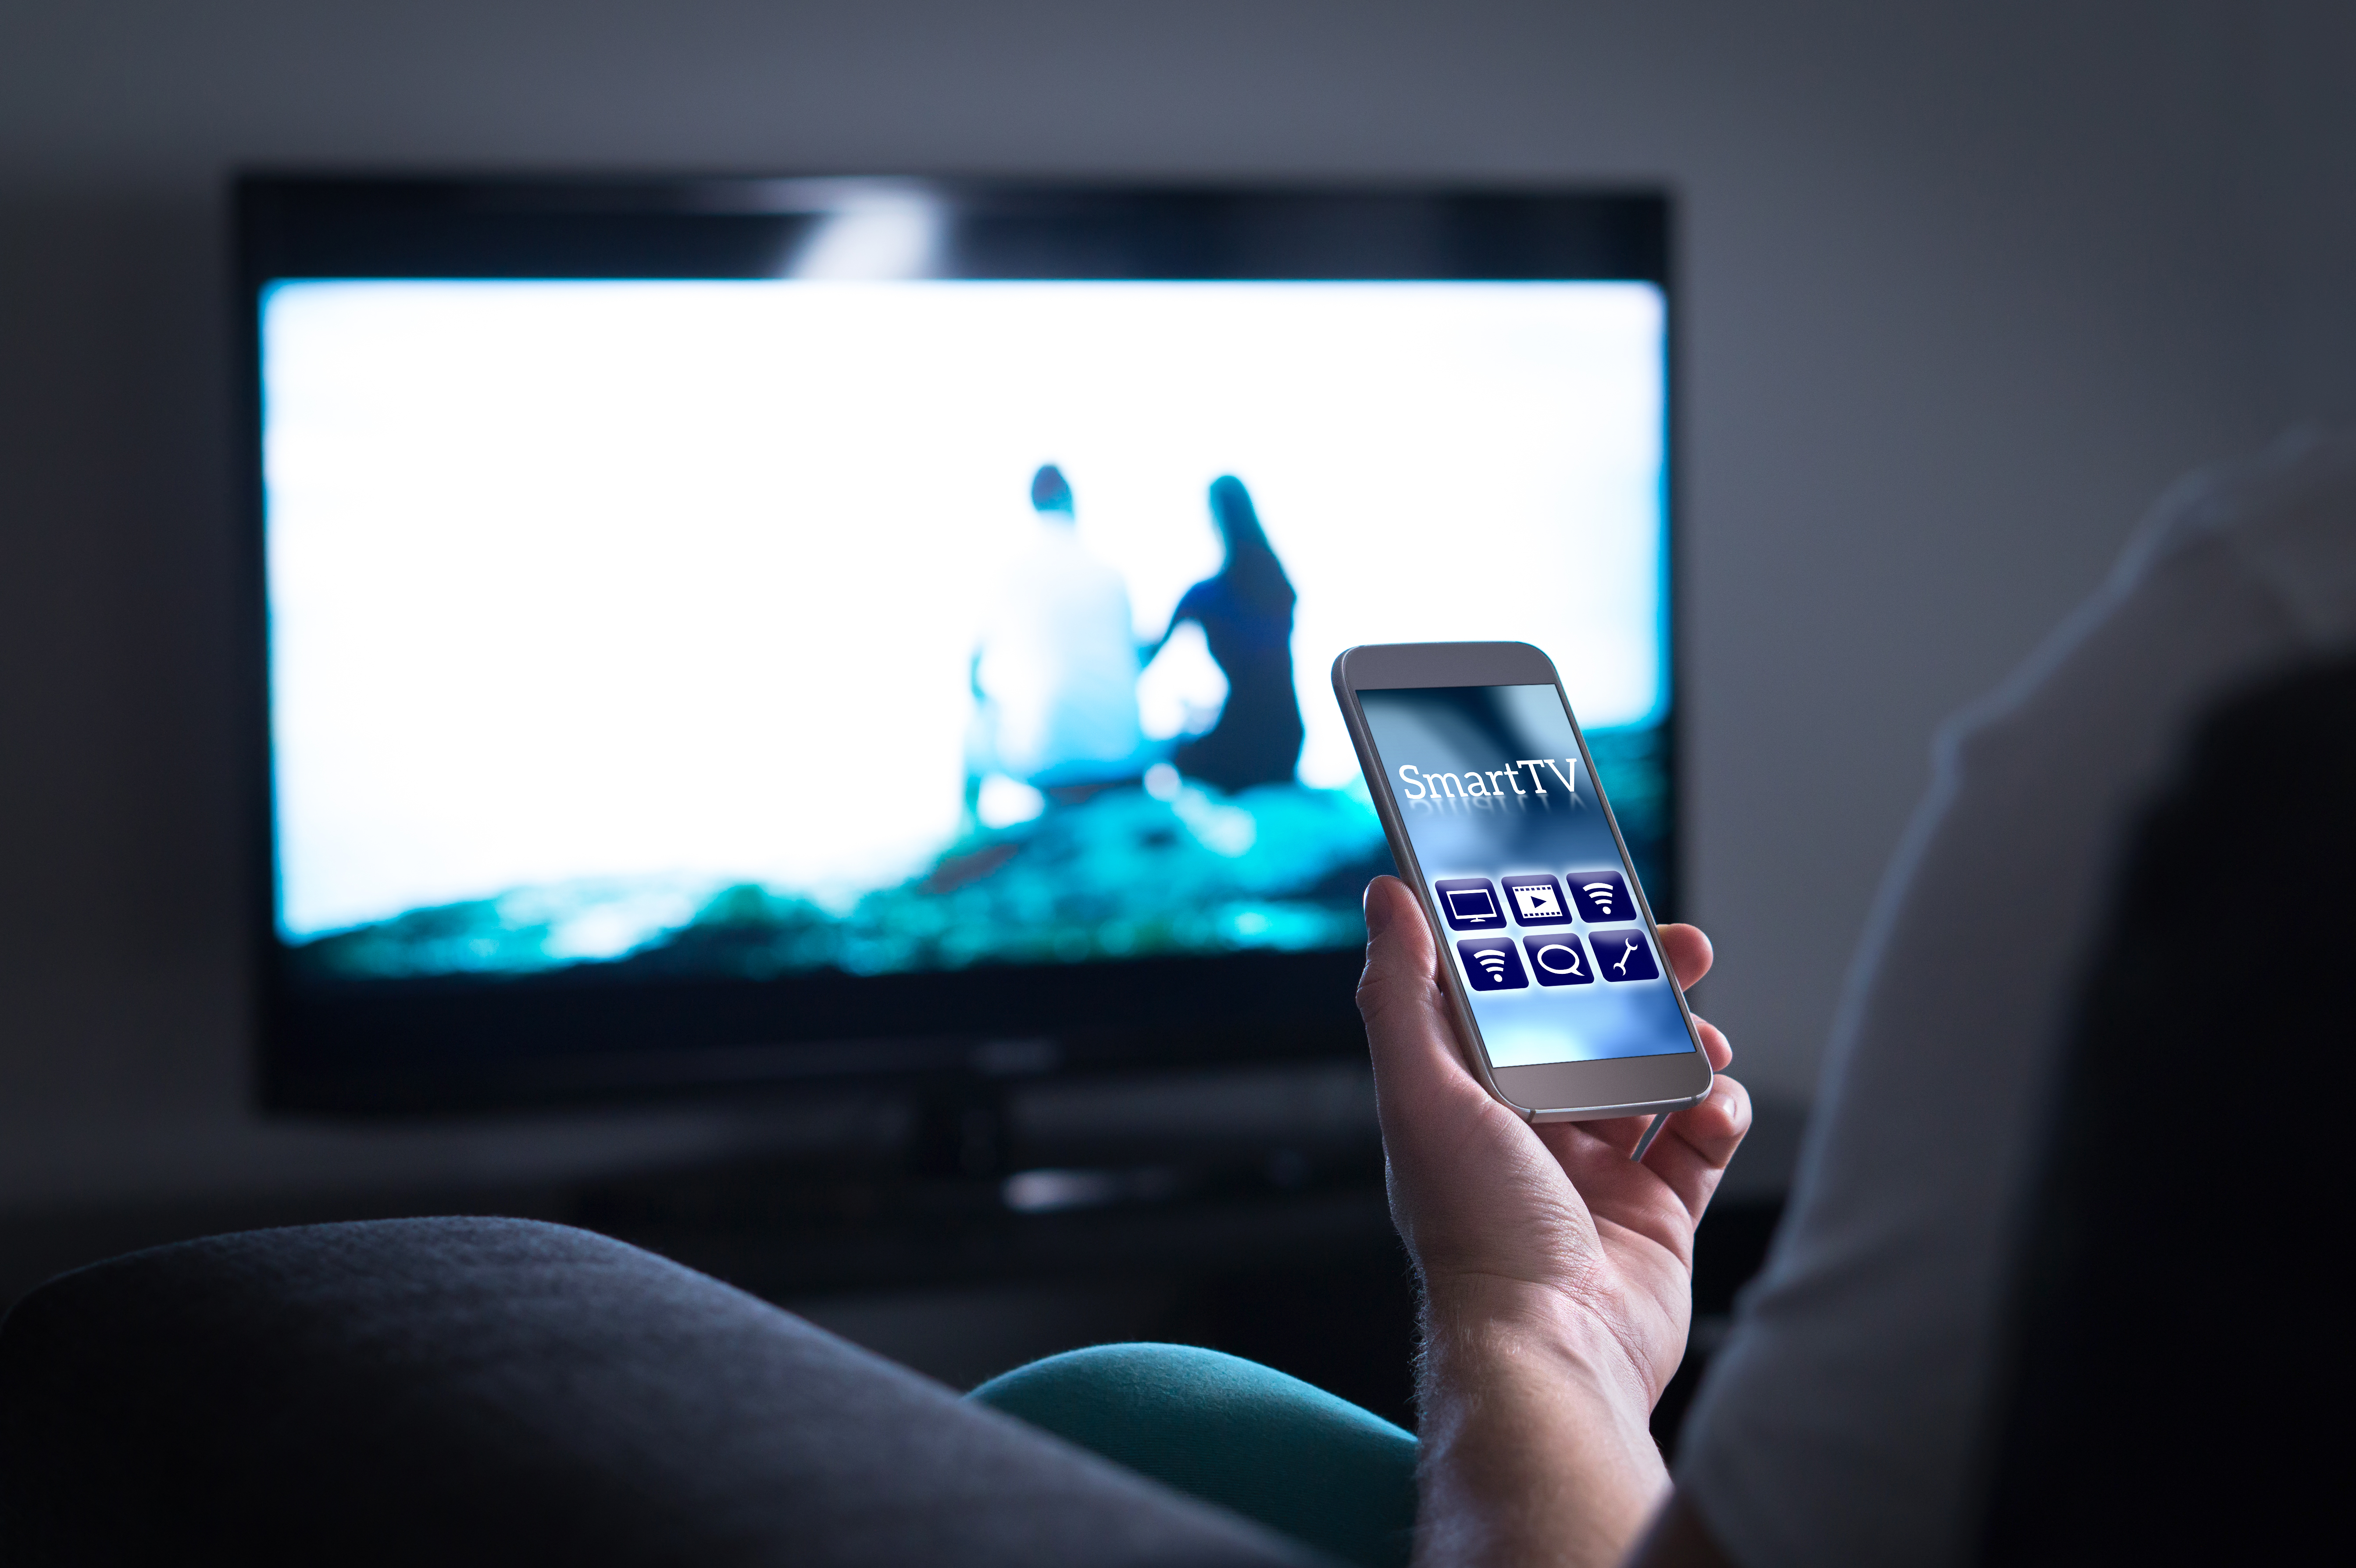 How Linear TV Benefits From An Excess of Streaming Options